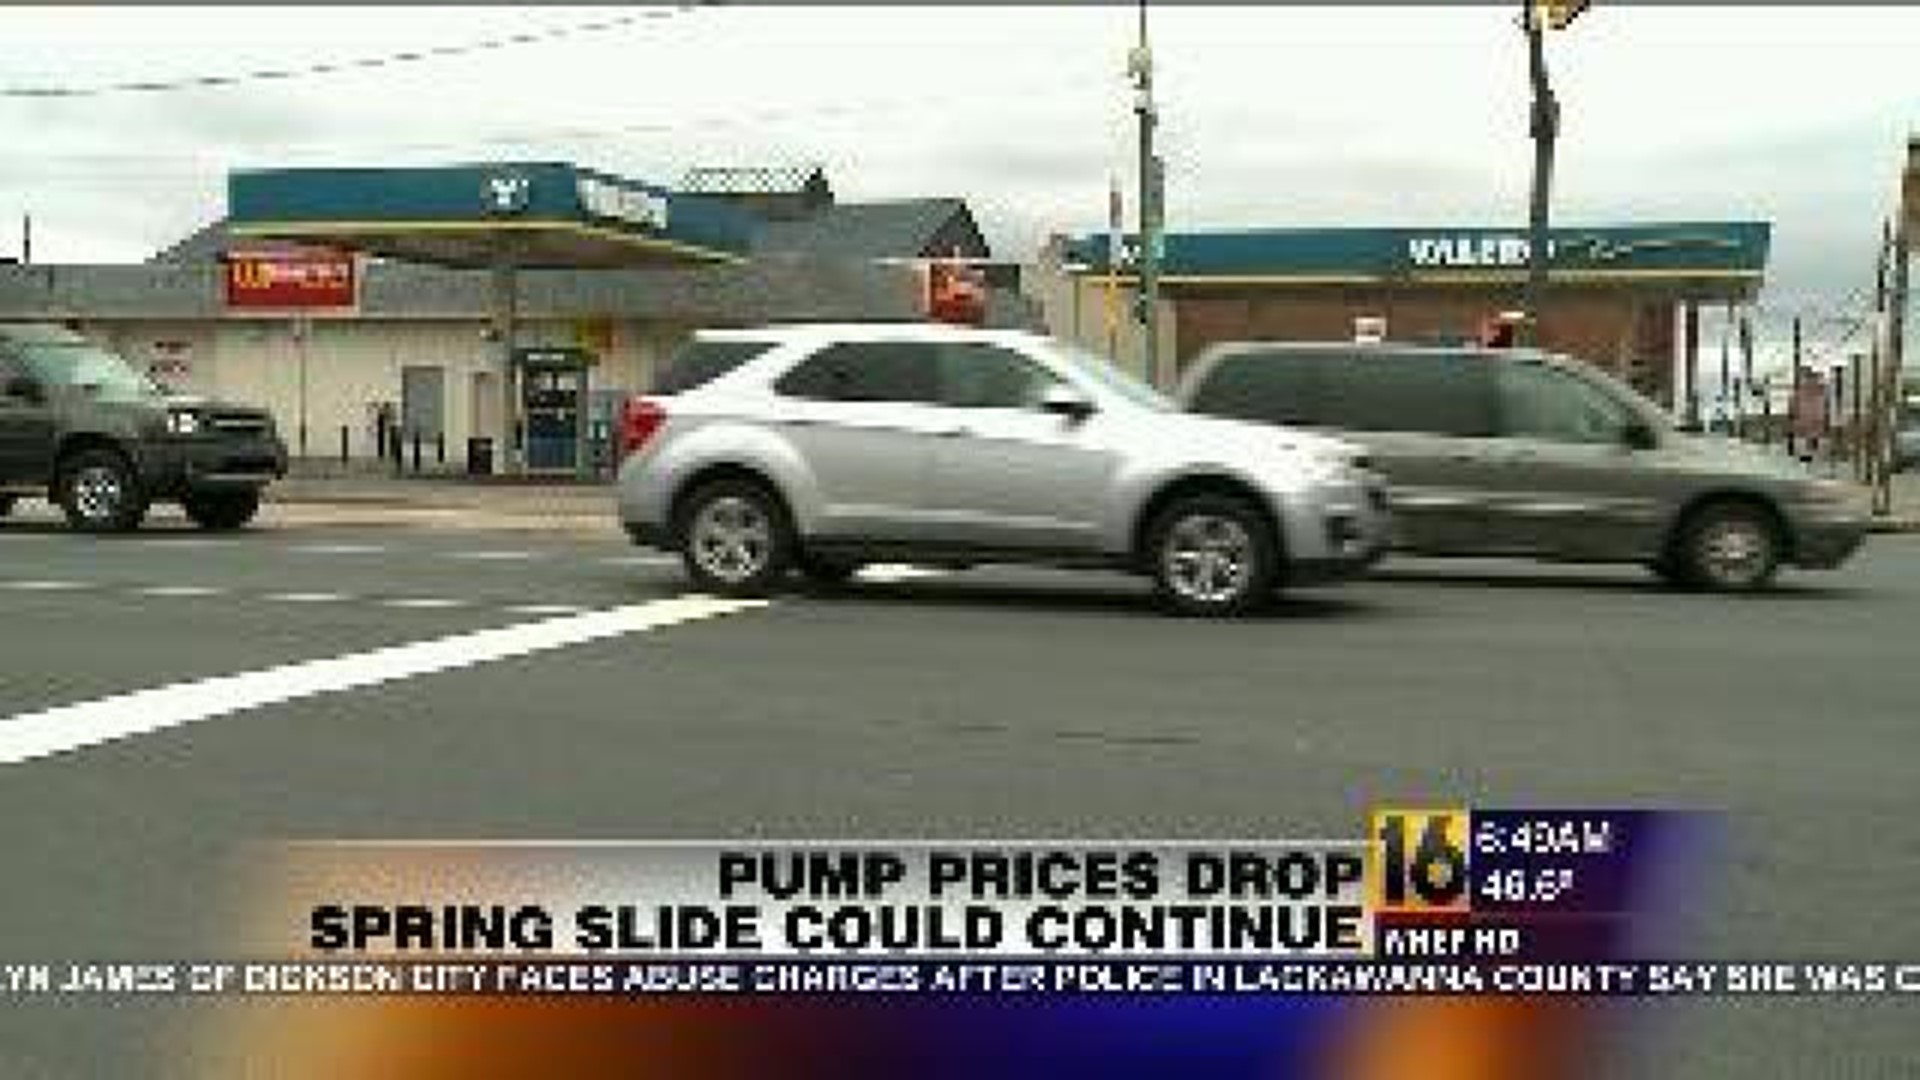 Pump Prices Drop: Spring Slide Could Continue